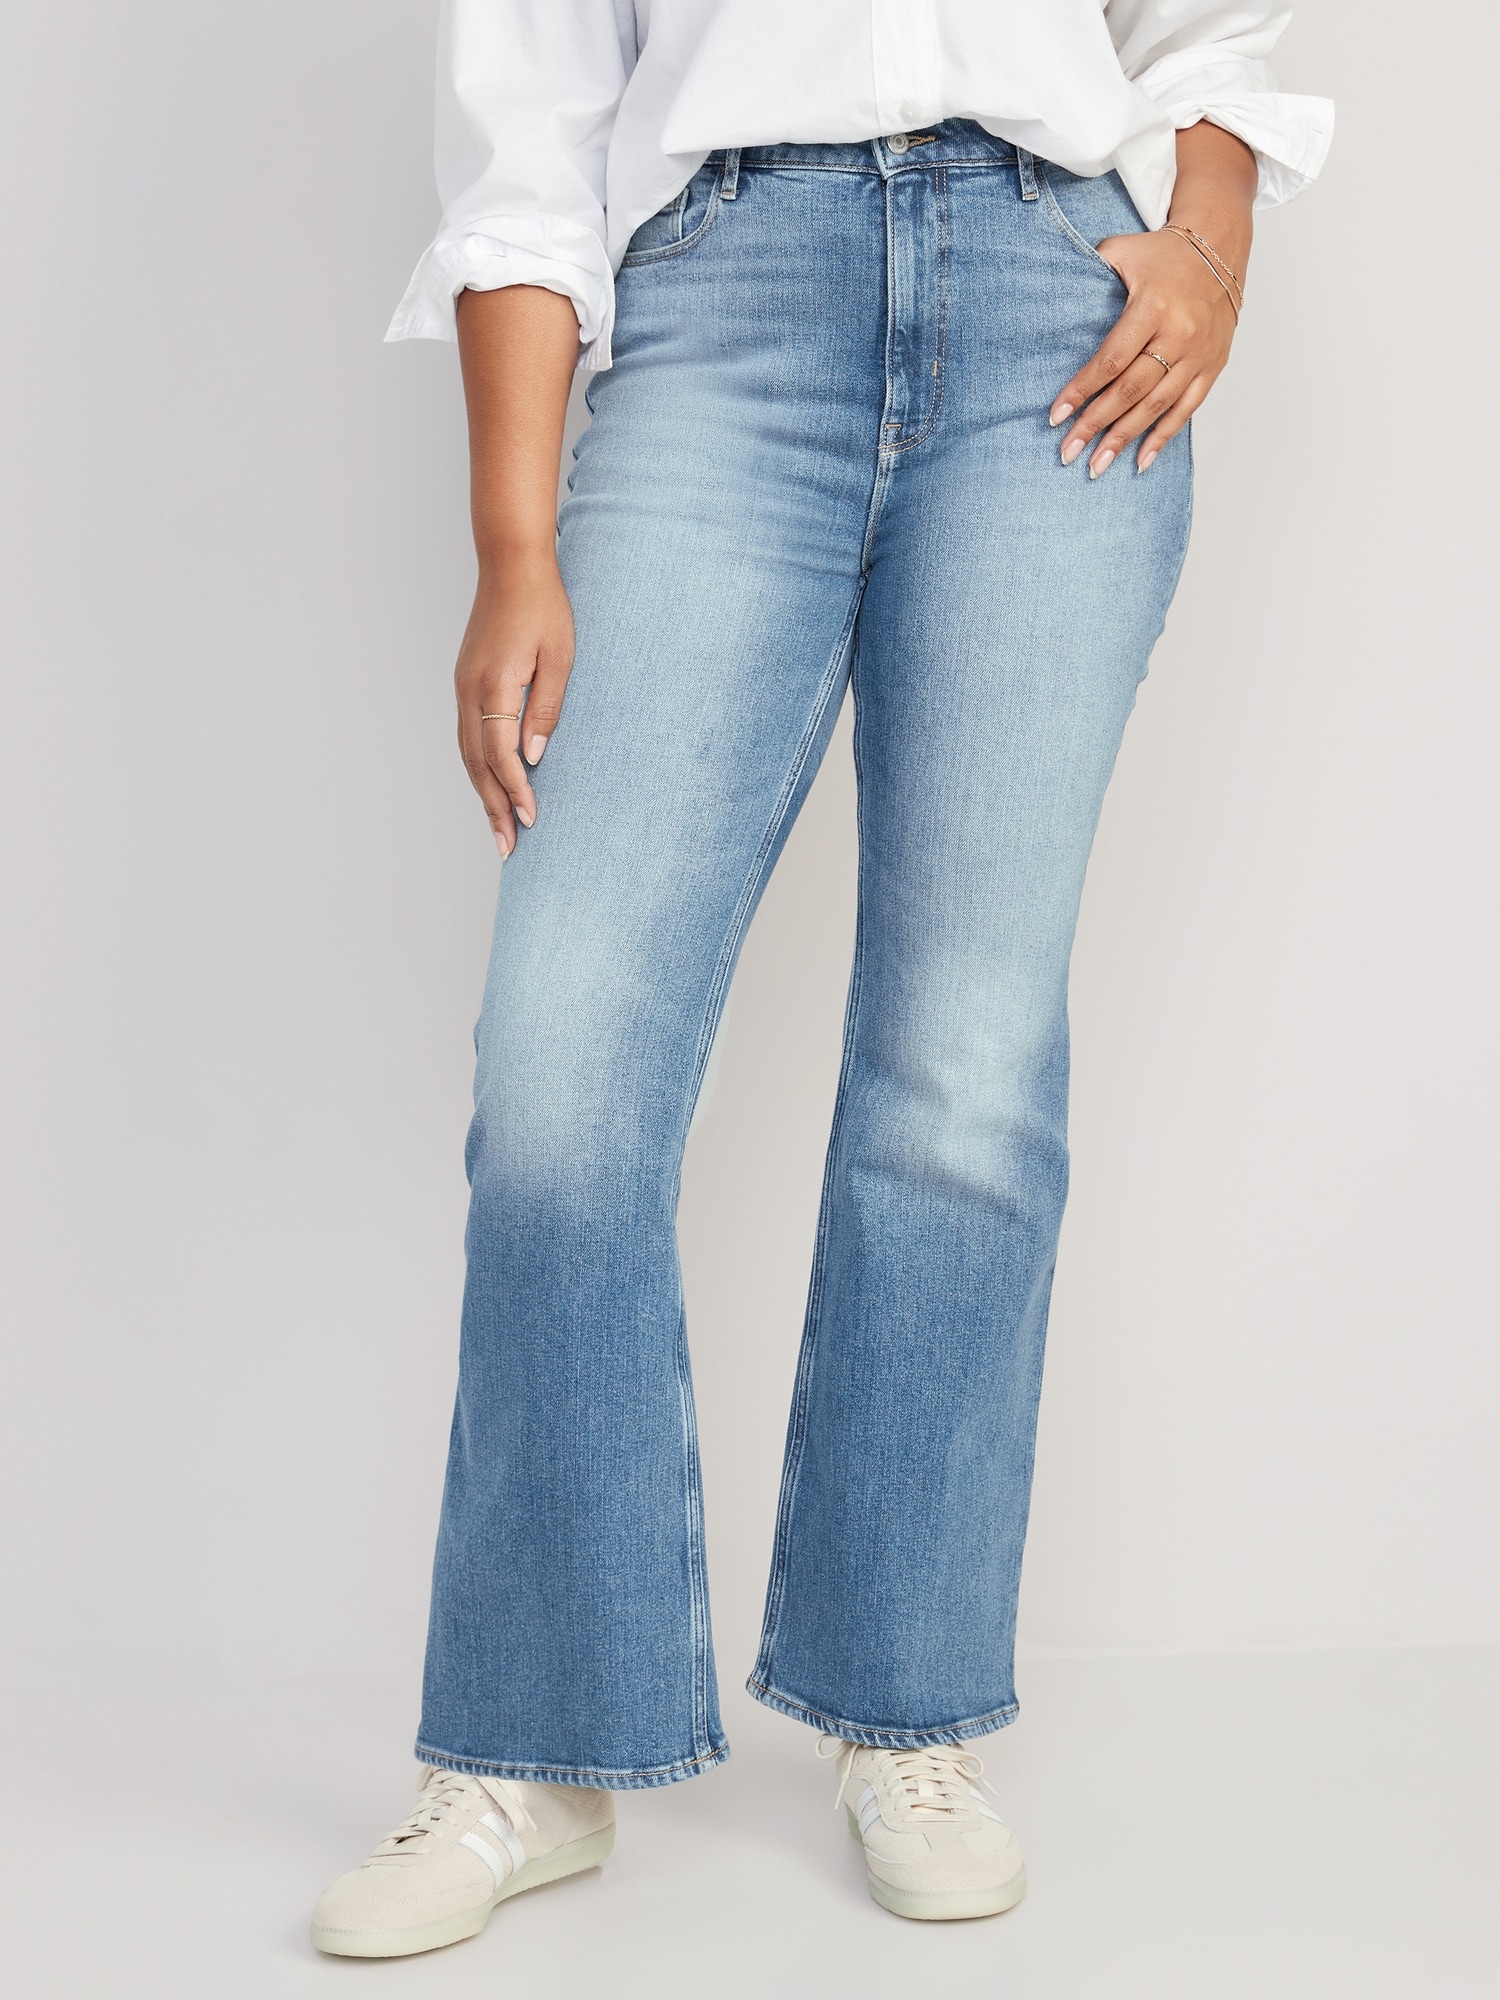 NEW Old Navy Women's High-Rise Secret-Slim Pockets Raw-Edge Flare Ankle  Jeans